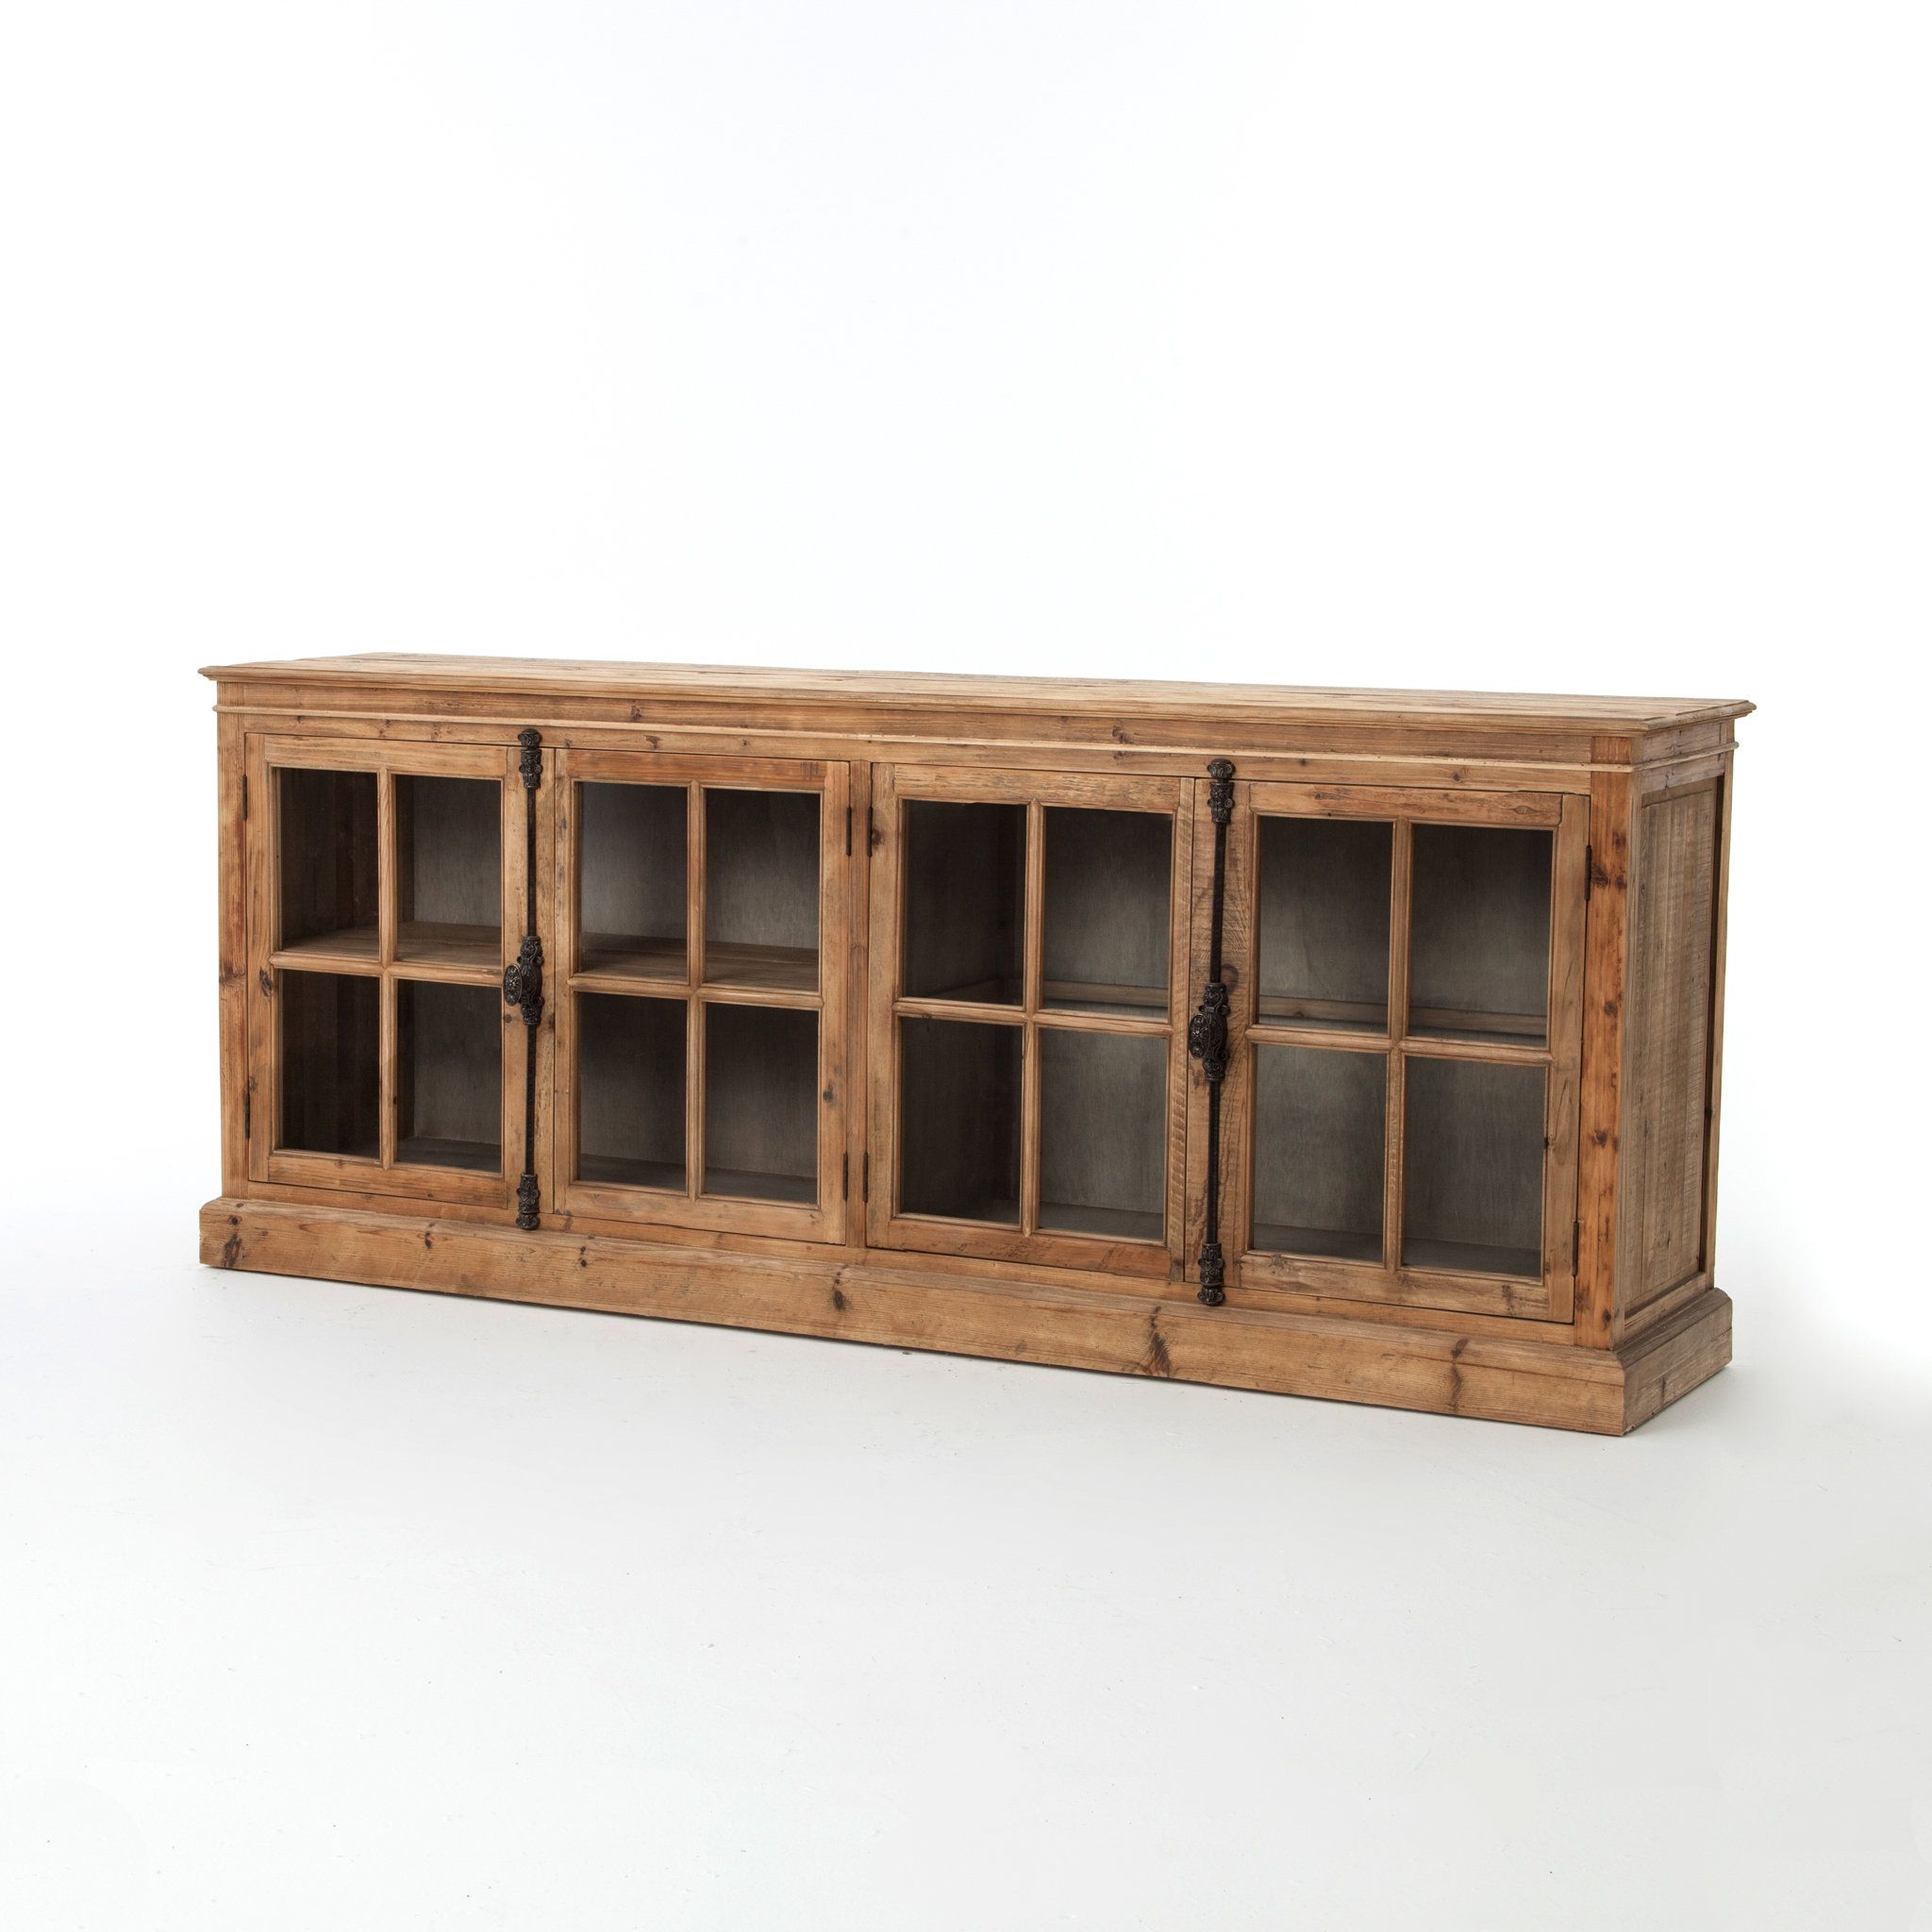 Downey Sideboard Regarding Recent Amityville Sideboards (View 15 of 20)